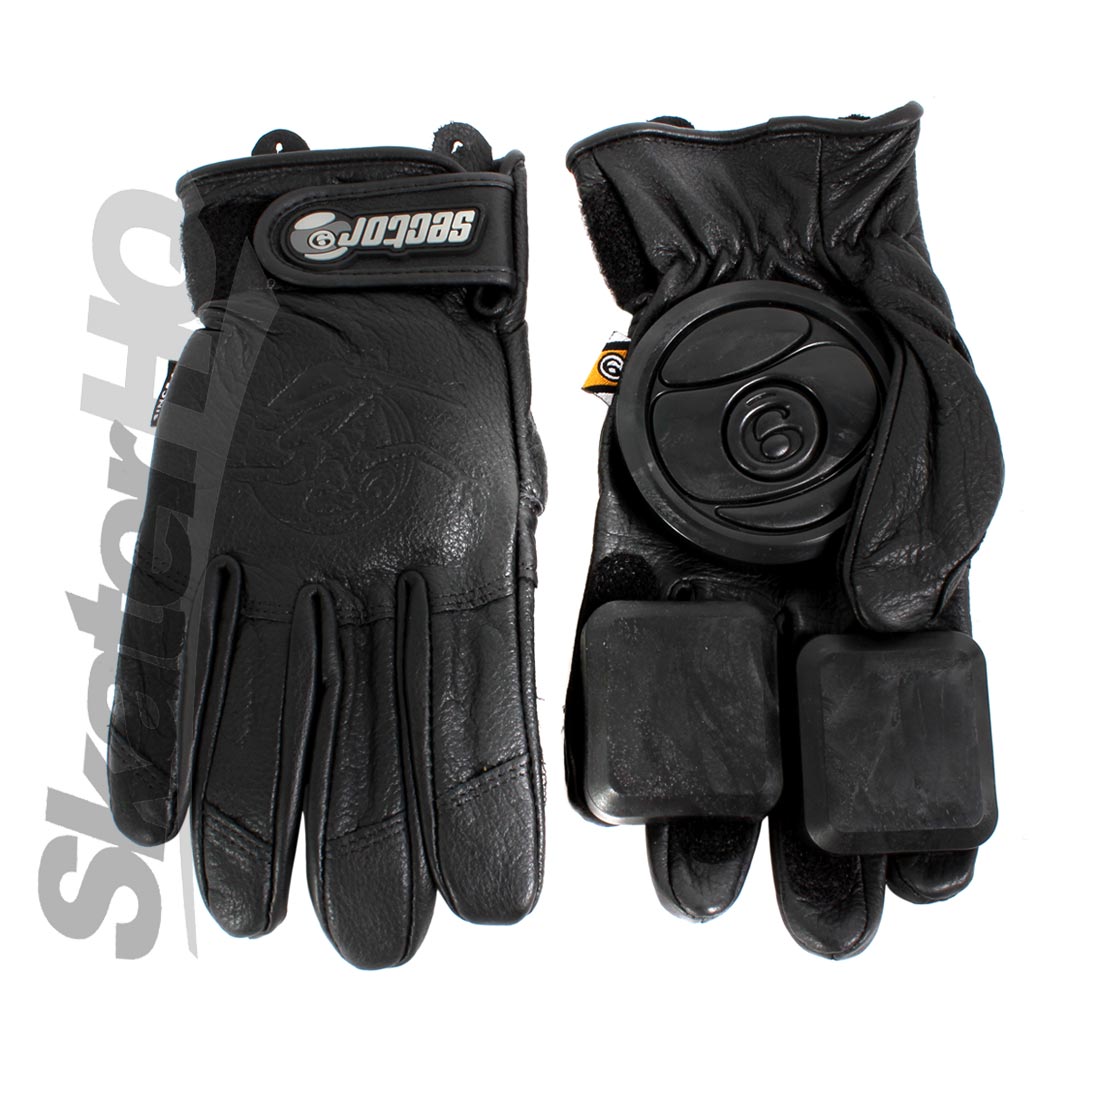 Sector 9 Surgeon Slide Glove Stealth - S/M Protective Gear